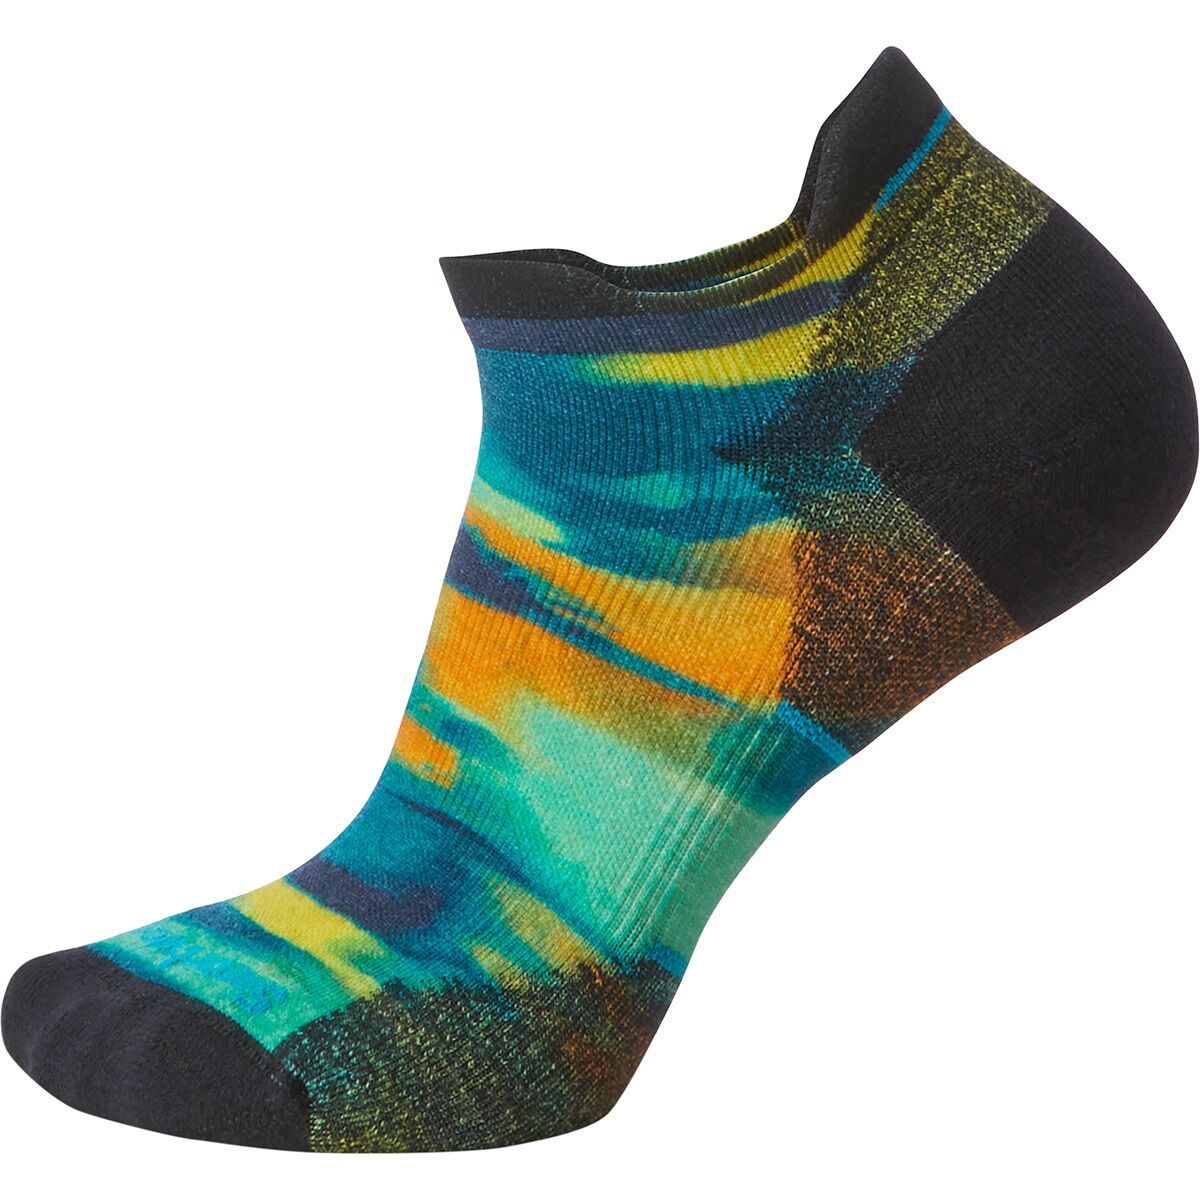 Smartwool Run Targeted Cushion Brushed Print Low Ankle Sock - Women's